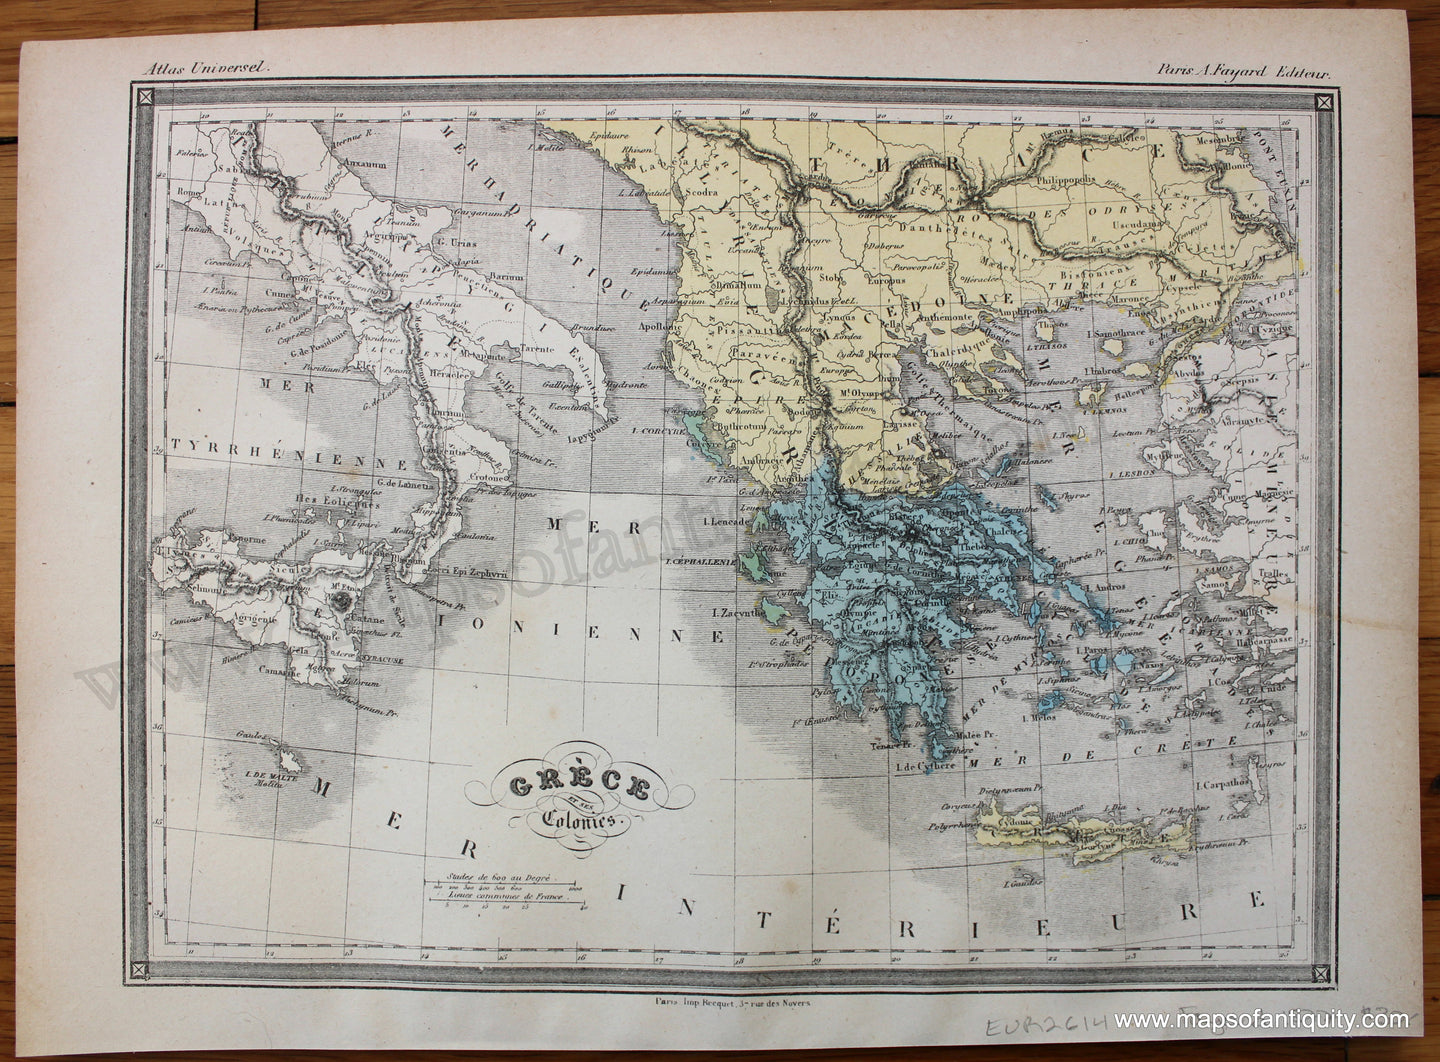 Antique-Printed-Color-Map-Grece-et-ses--Colonies-1877-Fayard-Greece-&-the-Balkans--1800s-19th-century-Maps-of-Antiquity